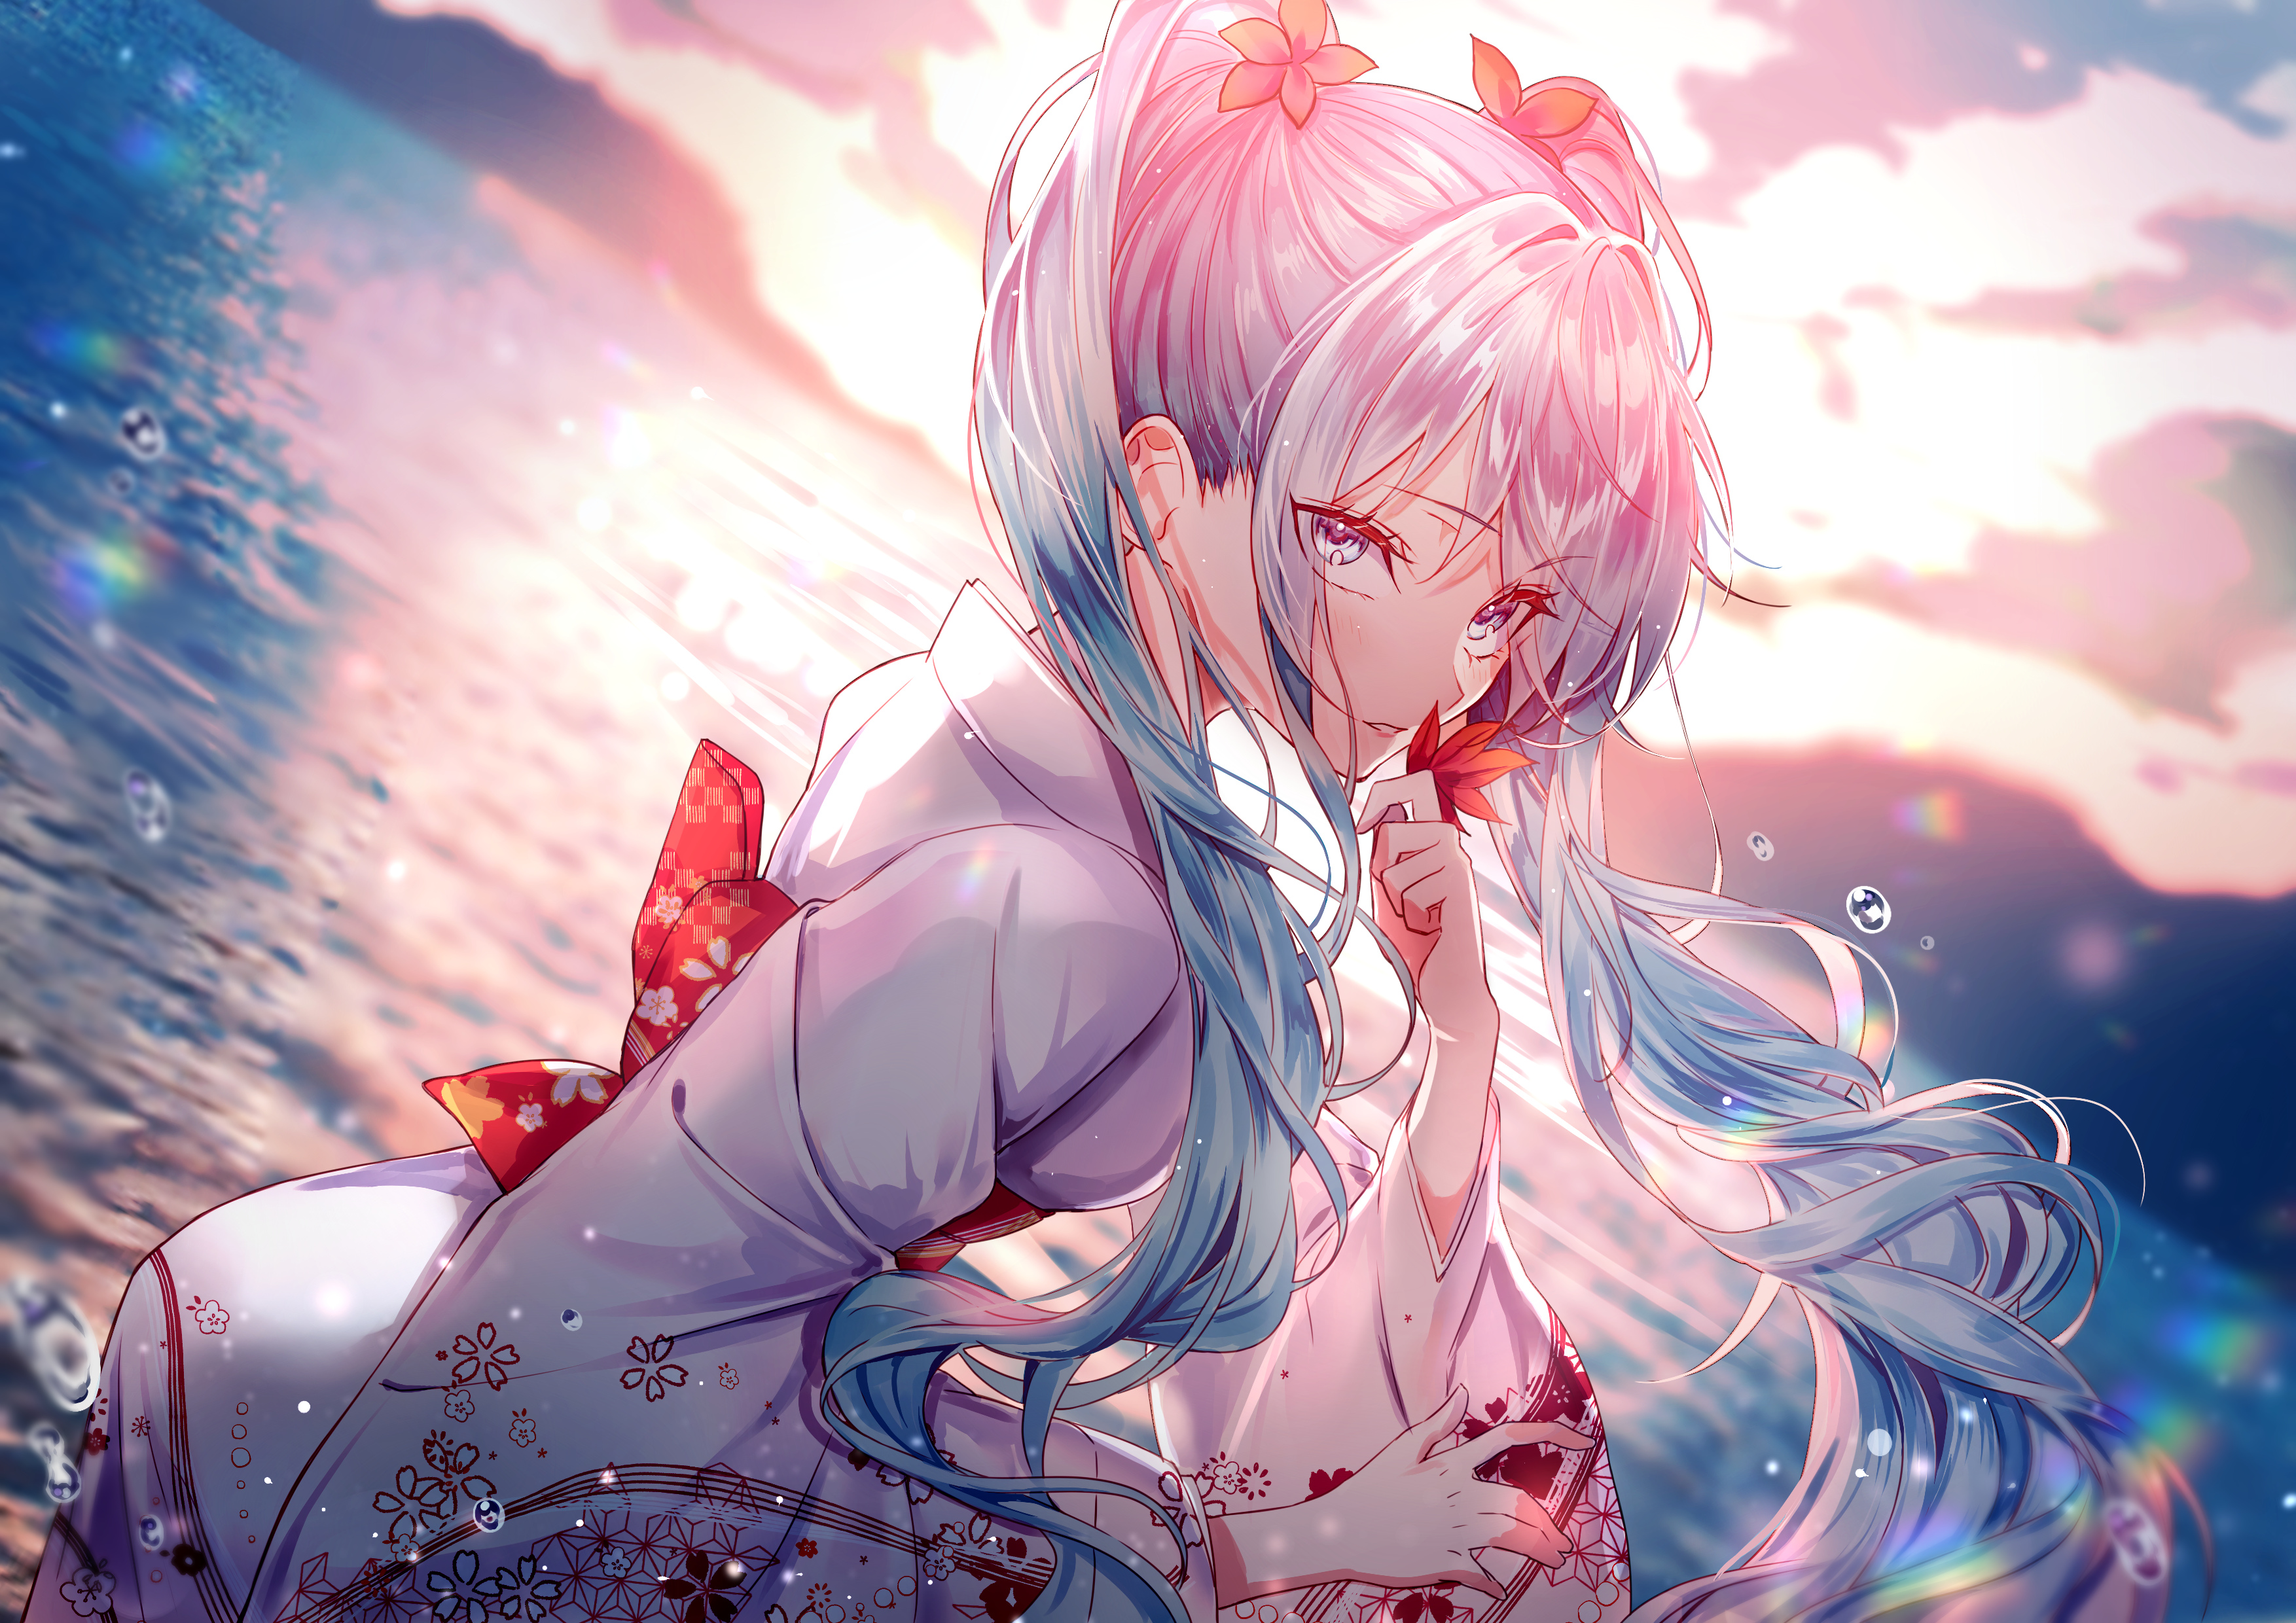 Anime Girl Wallpapers, HD Anime Girl Backgrounds, Free Images Download